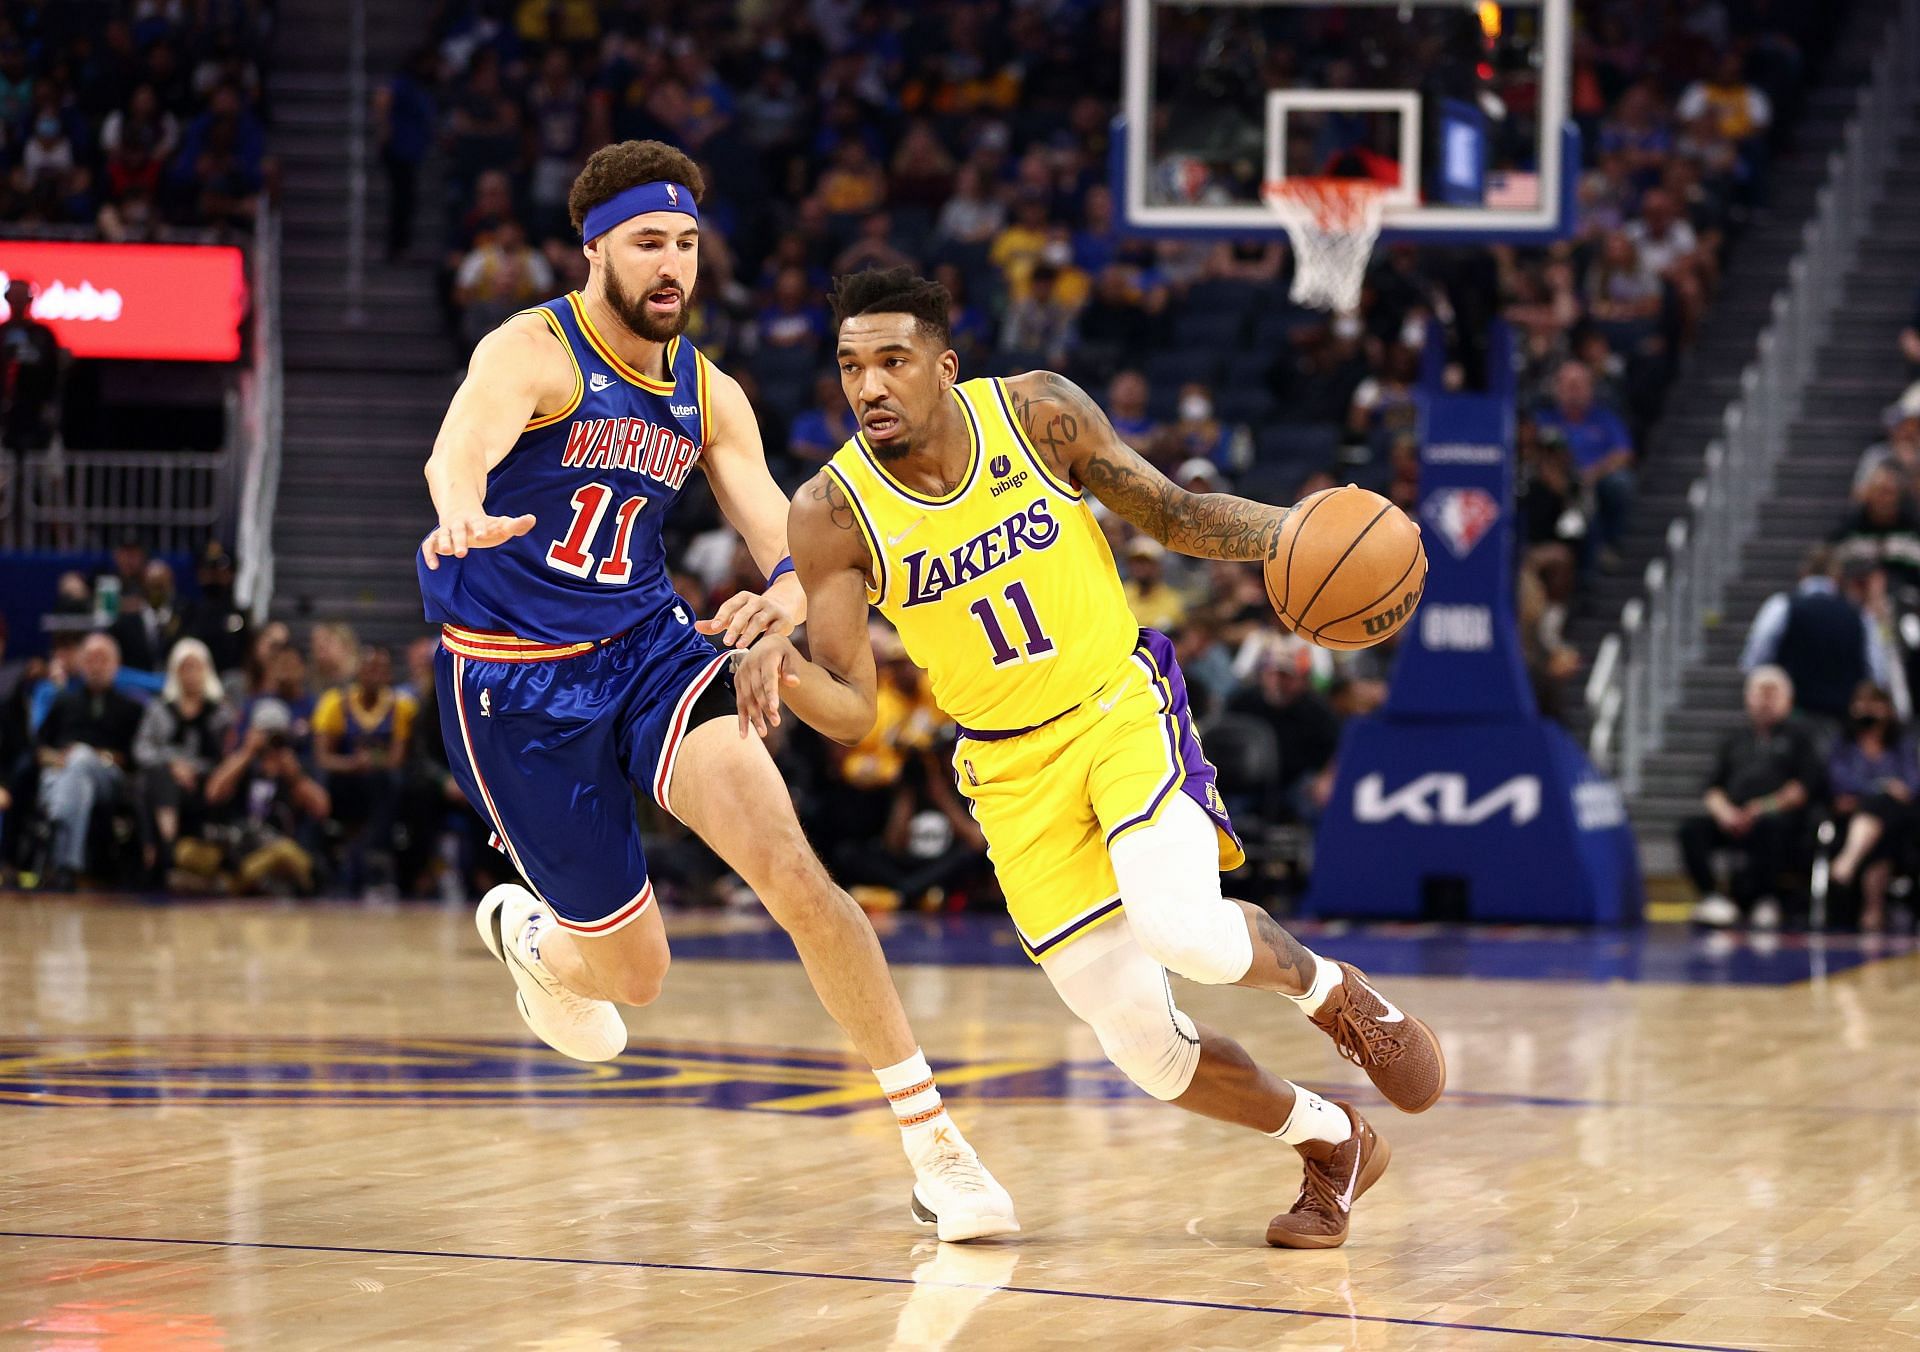 Malik Monk #11 of the Los Angeles Lakers is guarded by Klay Thompson #11 of the Golden State Warriors